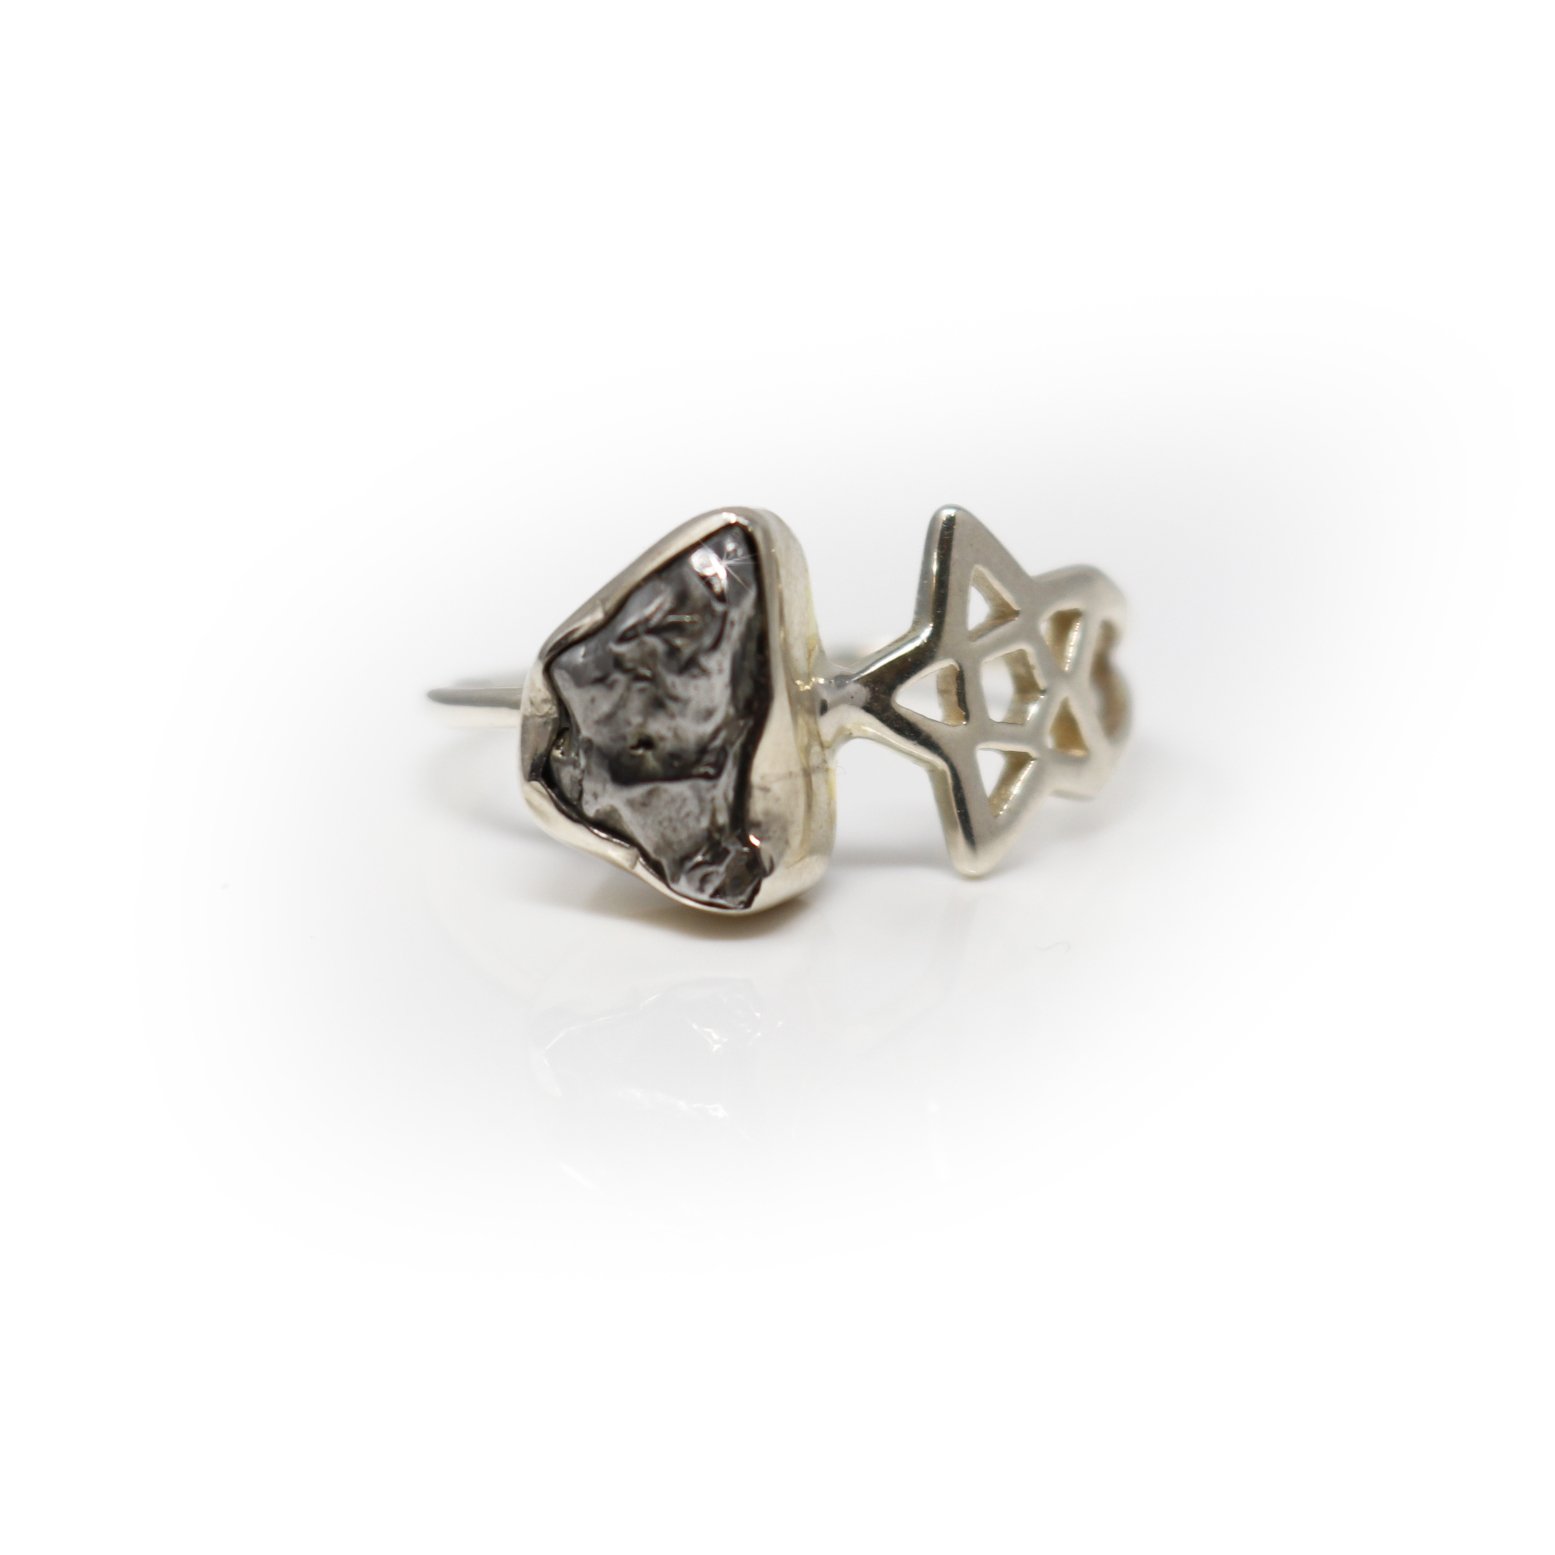 Campo De Cielo Meteorite Ring - Rough Freeform With 925 Sterling Silver Bezel & Star On Band Sz8